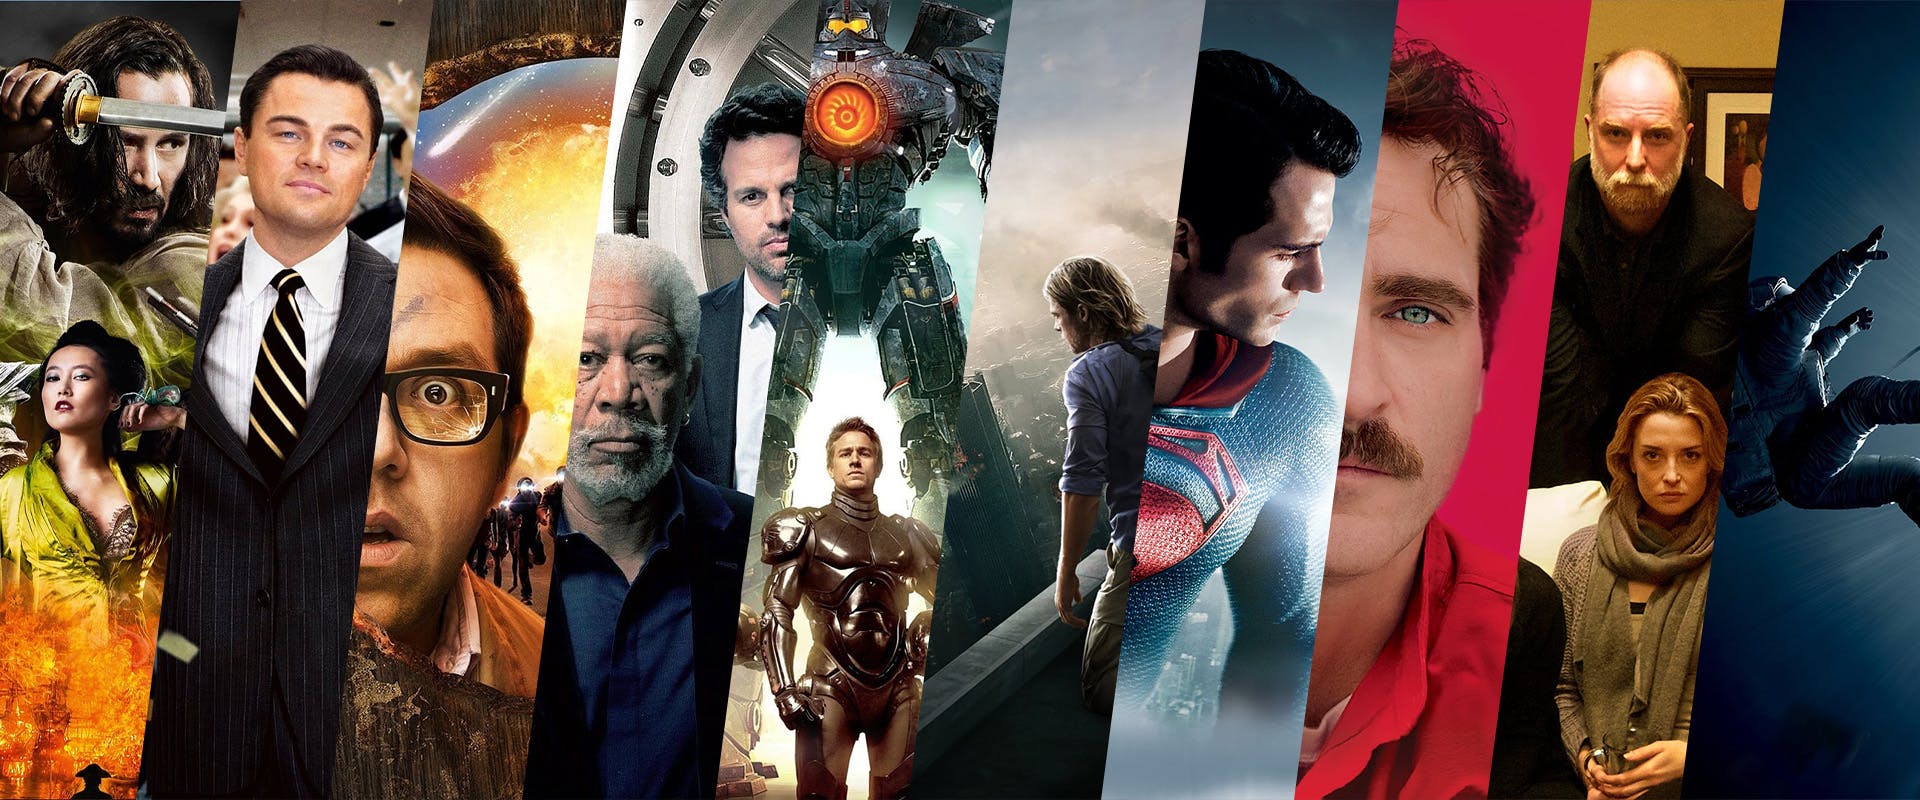 Top 10 Movies of 2013